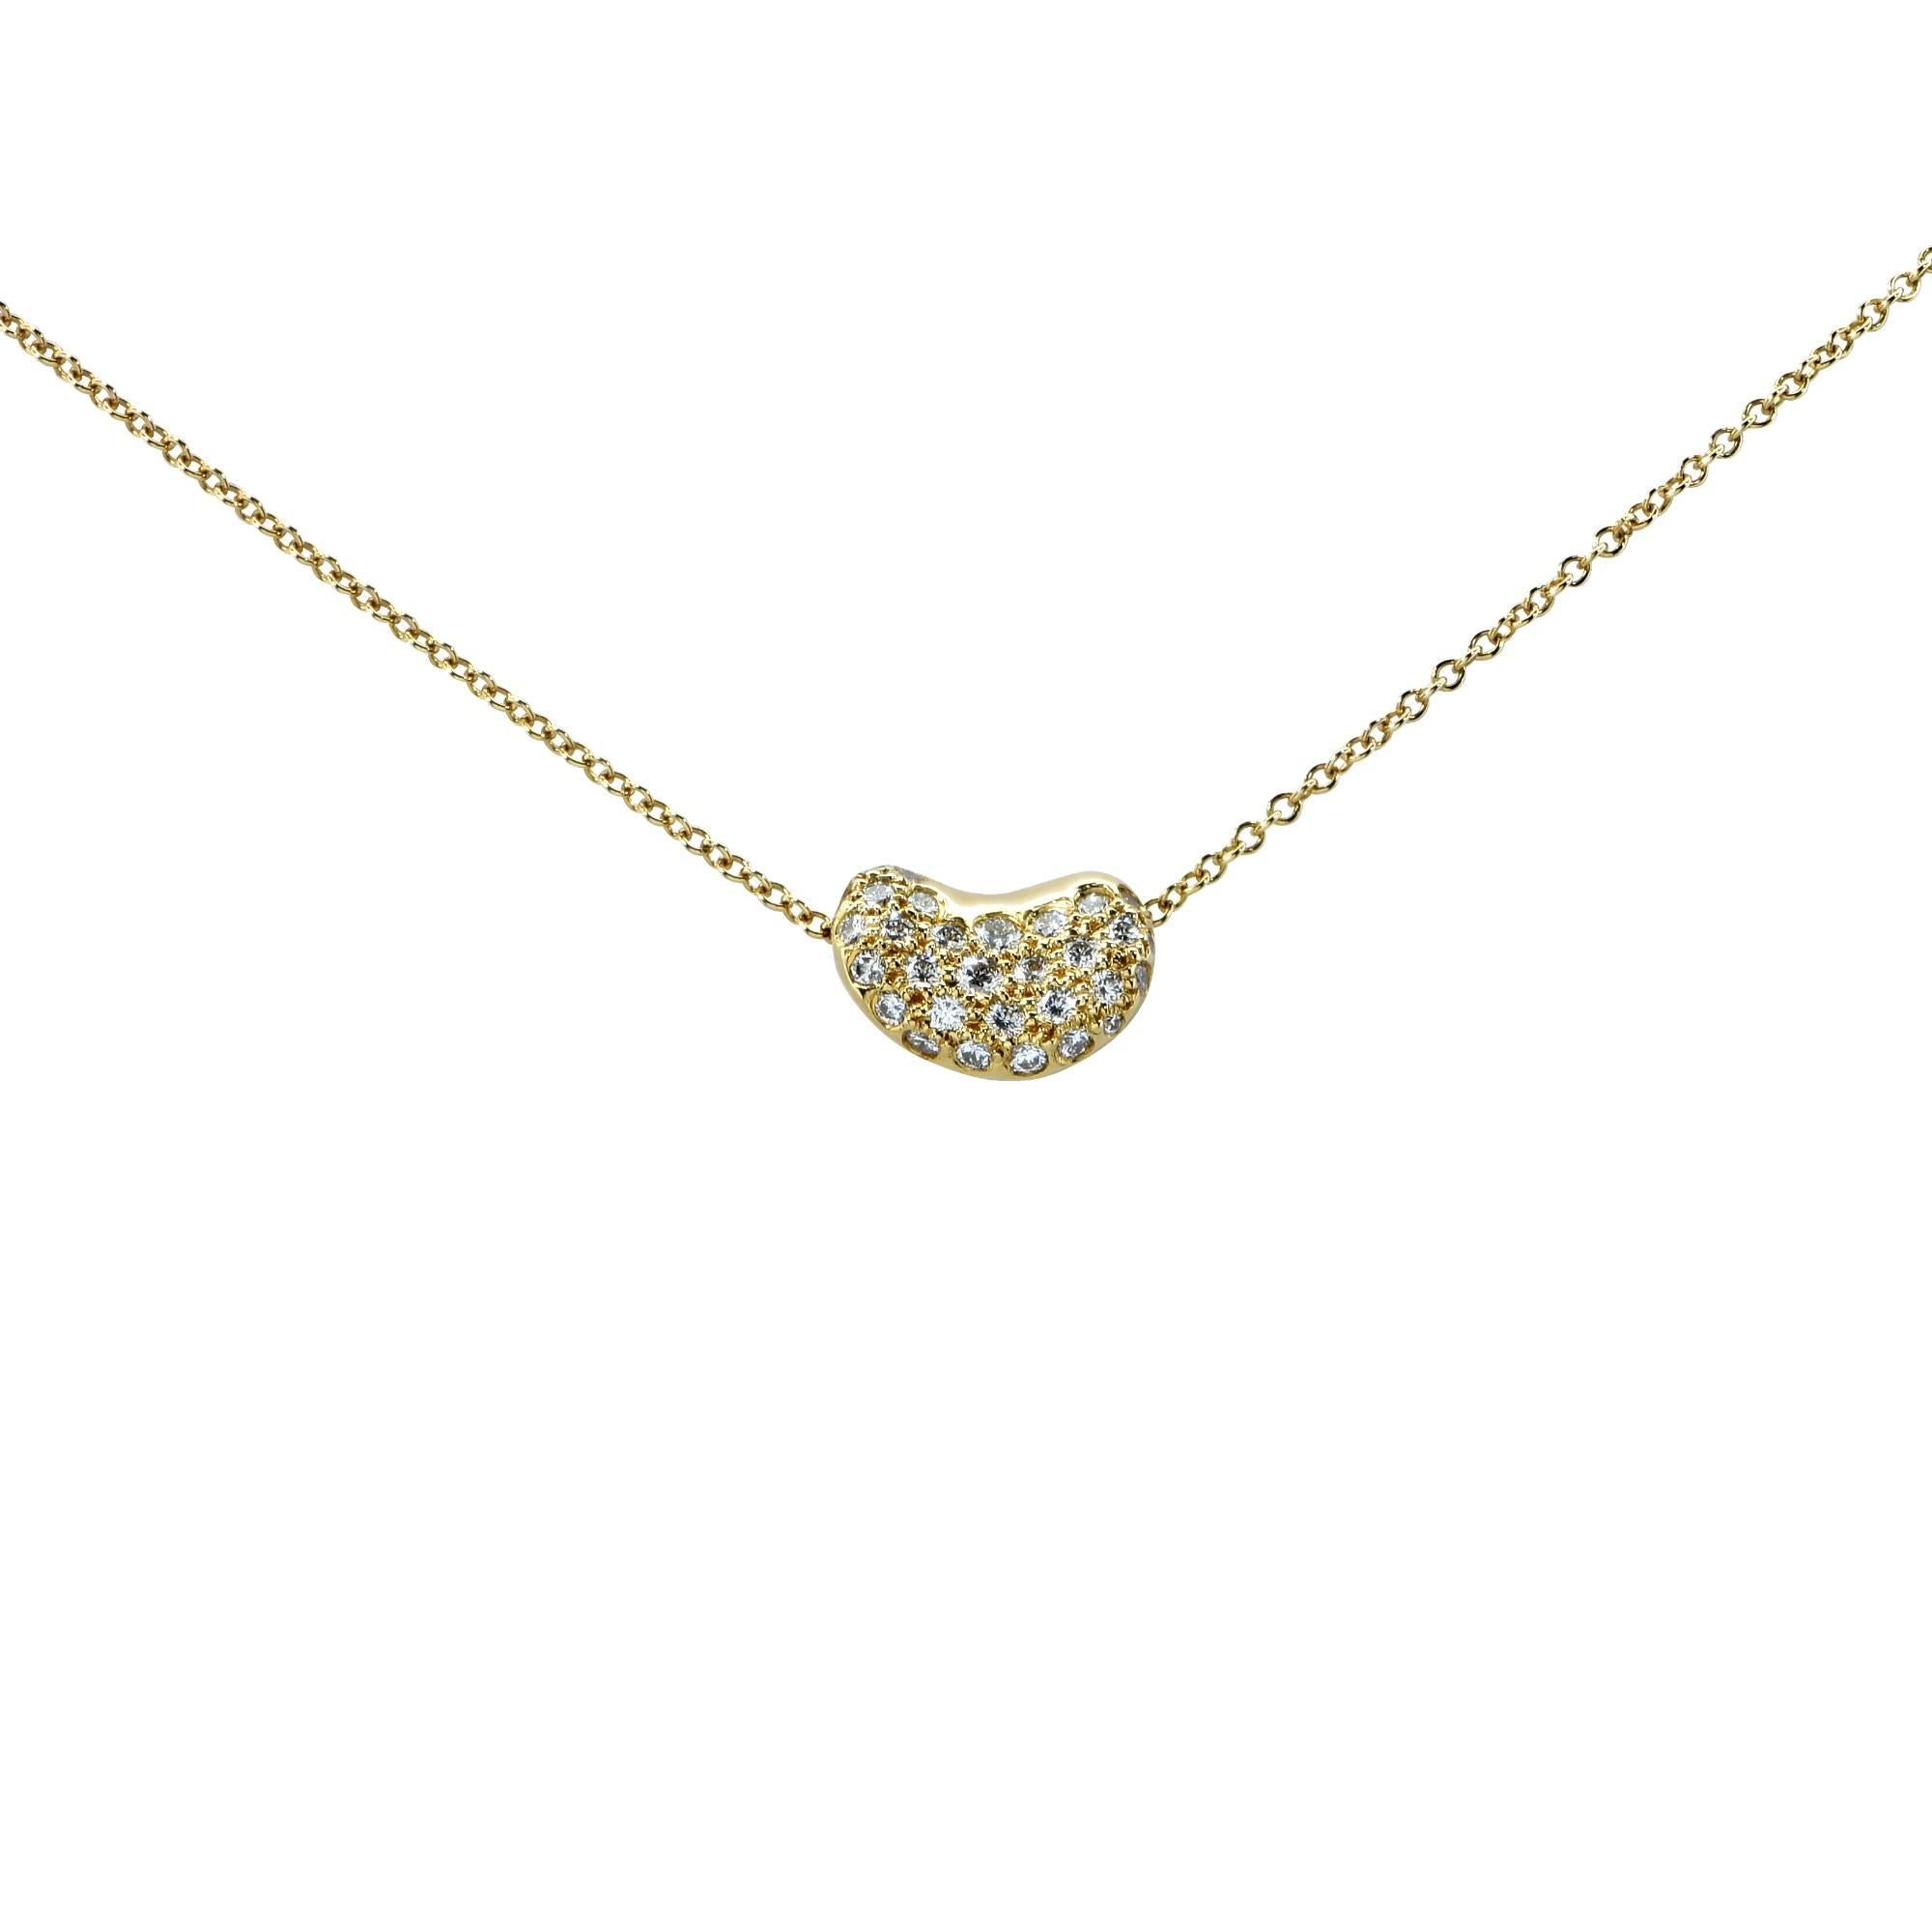 Tiffany & Co. Elsa Peretti bean necklace crafted in 18k yellow gold features .25cts of round brilliant cut diamonds, G color, VS clarity.

This necklace has a 16 inch chain with a pendant that measures 10.5mm in length by 7.5mm in width by 4.8mm in